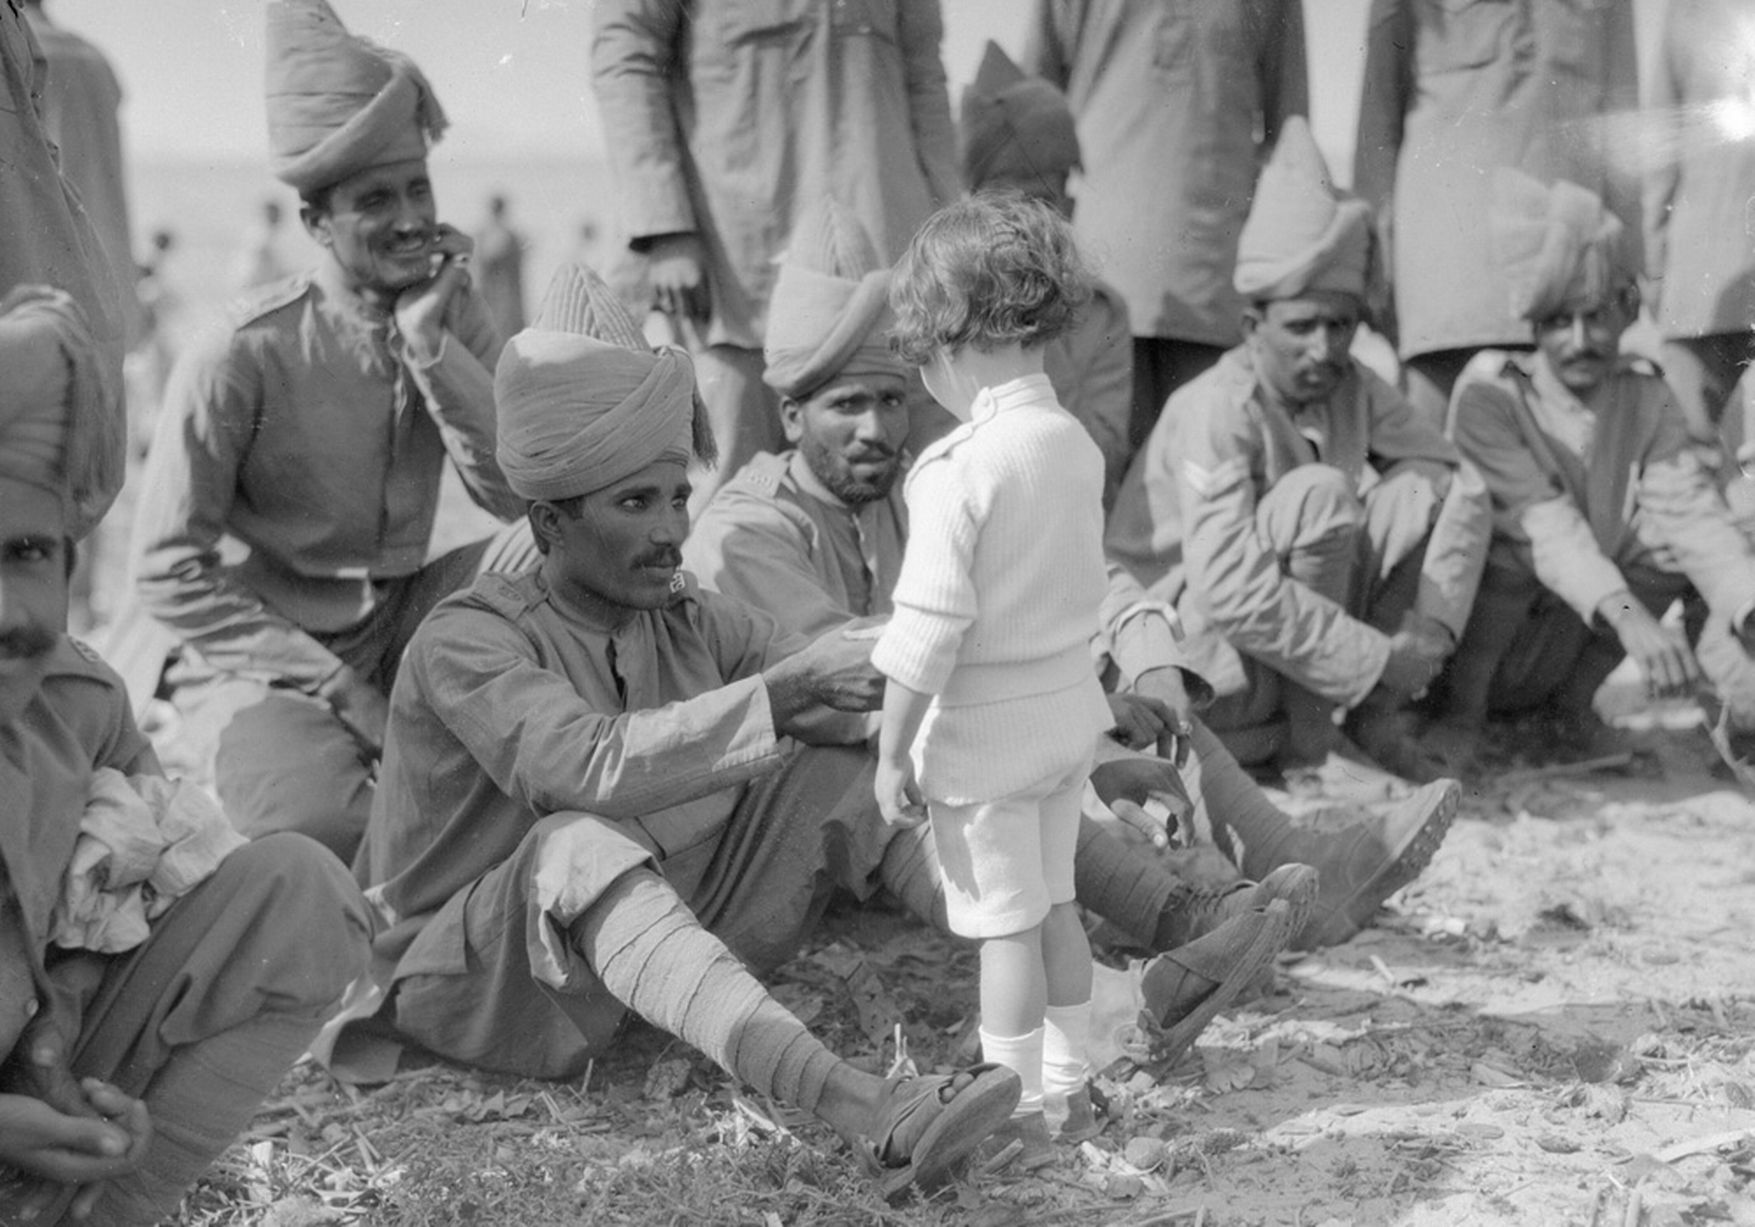 A French boy introduces himself to Indian soldiers who had just arrived in France to fight alongside French and British forces, Marseilles, 30th September. 1914